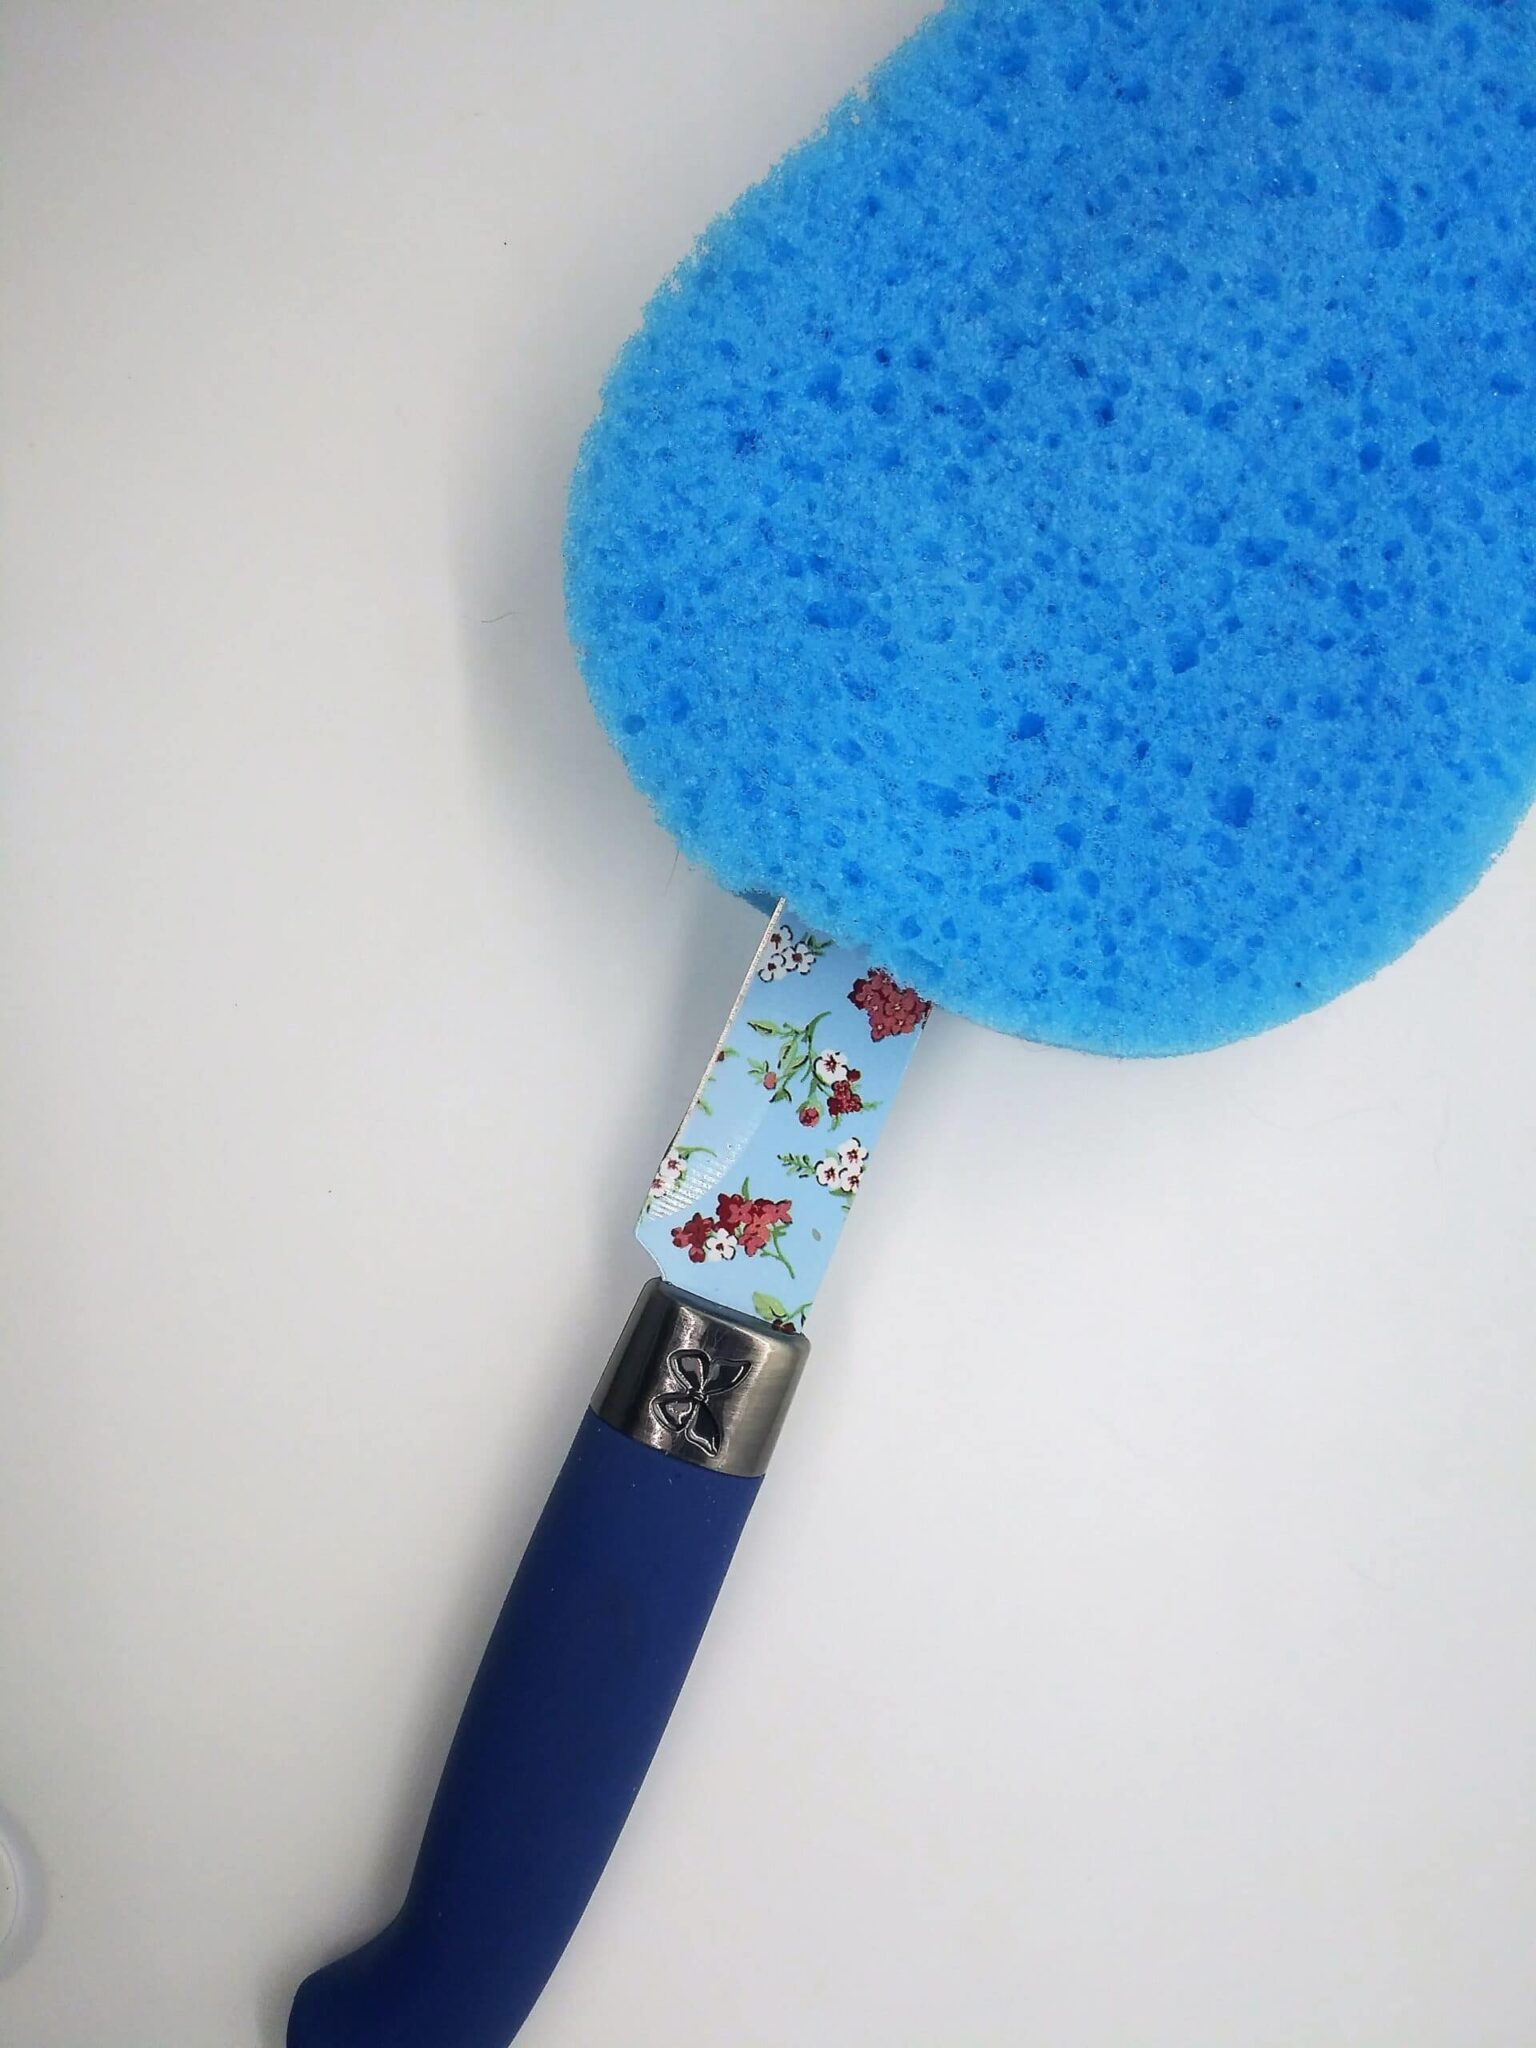 DIY anal sex toys, making a toy from a sink plunger. Photo of a large, blue sponge with a kitchen knife cutting a slit in the bottom.